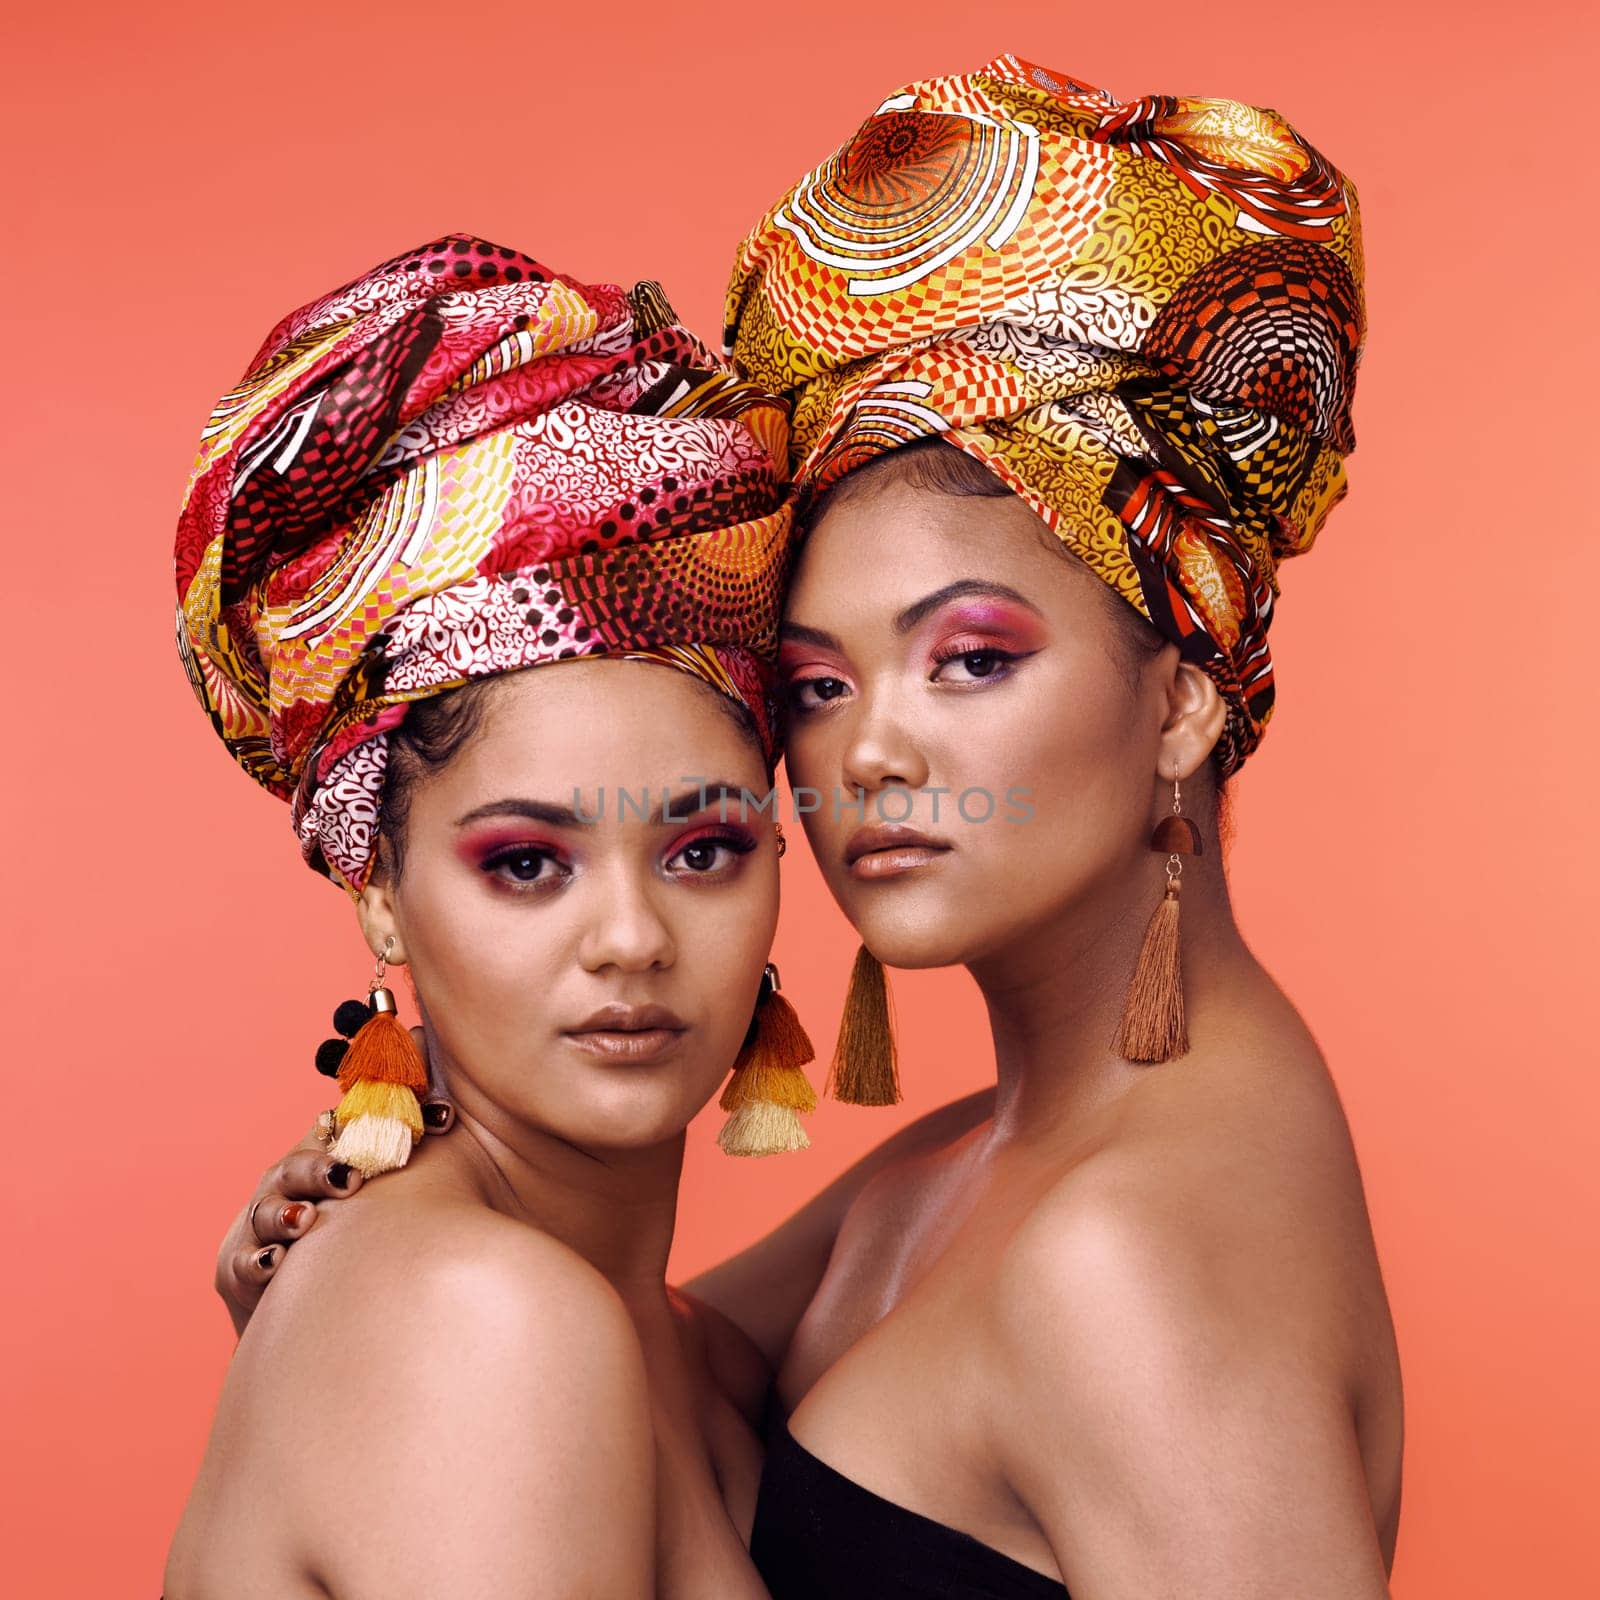 African fashion, makeup and portrait of women on orange background for cosmetics, beauty and accessory. Glamour, designer and face of female people in exotic jewelry, luxury style and scarf in studio.